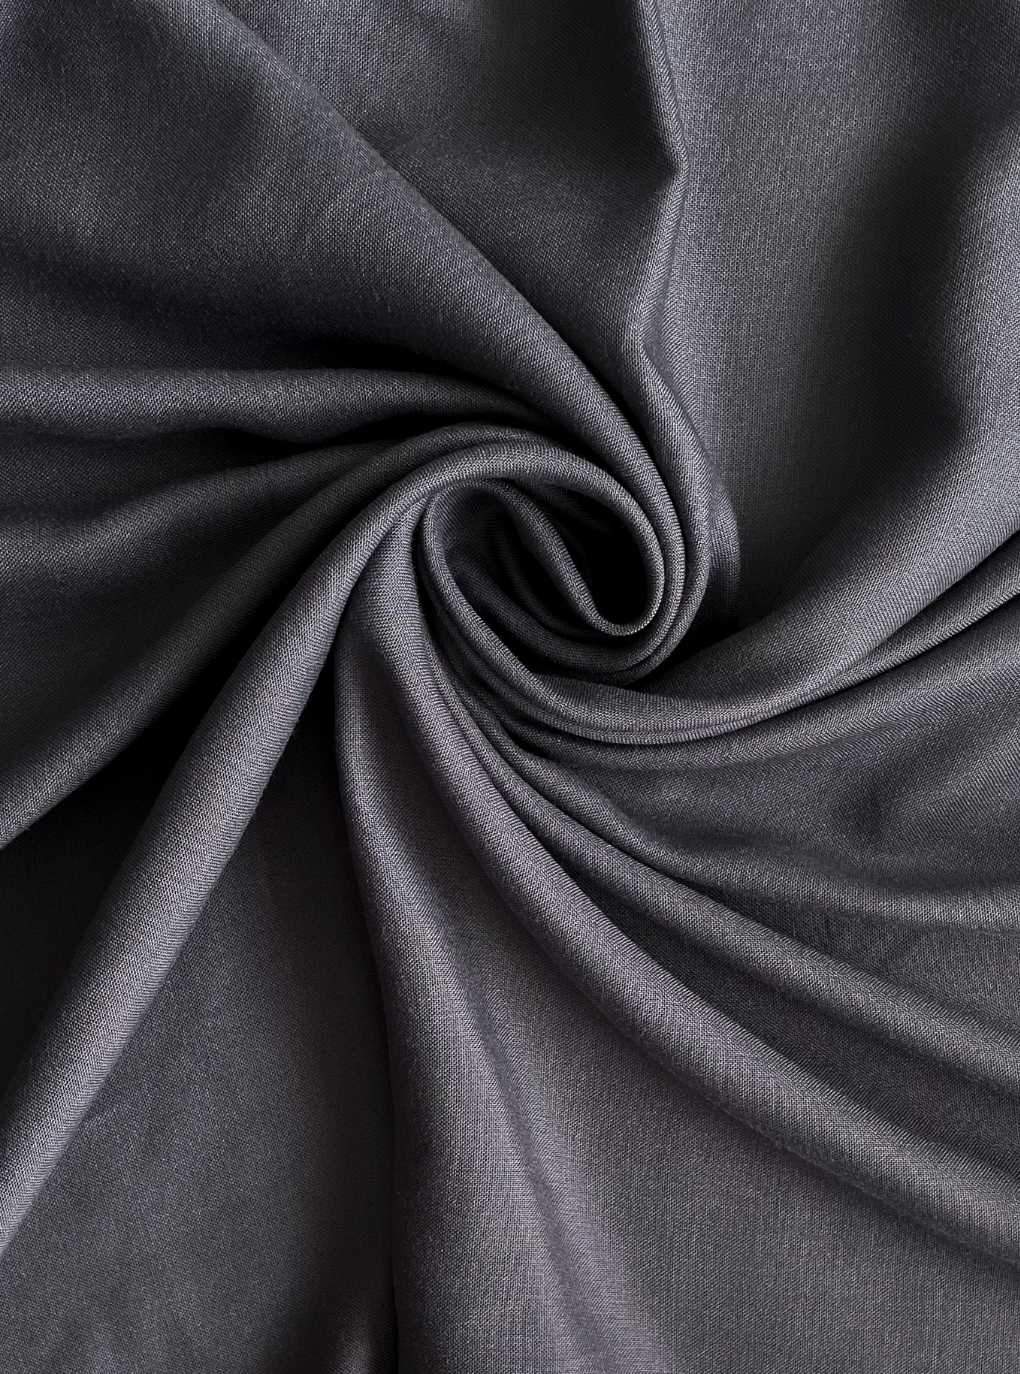 Fabric Pandit Fabric Charcoal Grey Color Pure Rayon Fabric